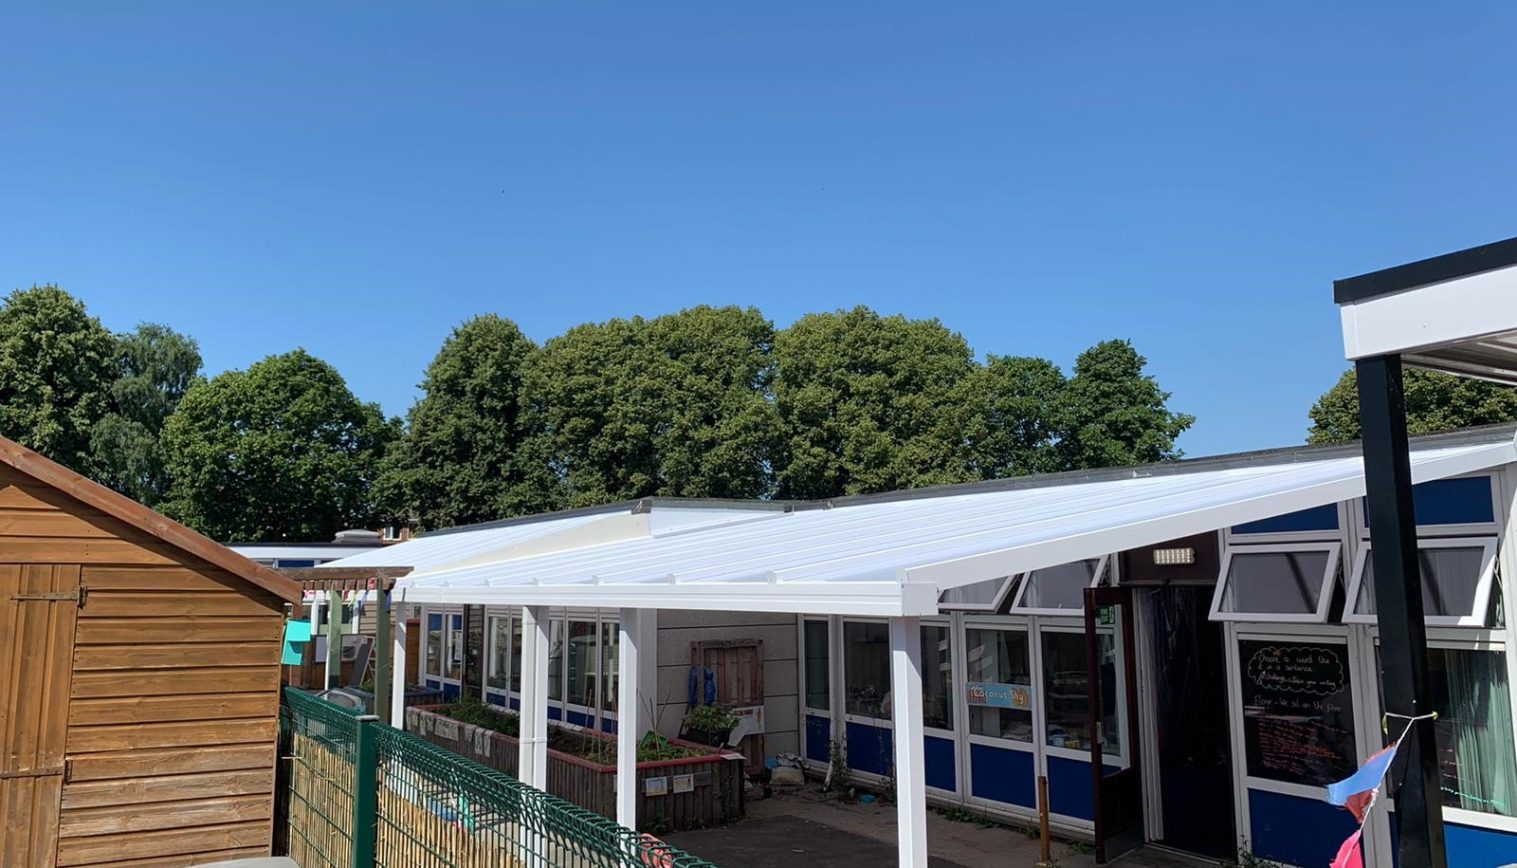 Saltersgate Infant School – Second Wall Mounted Canopy Install